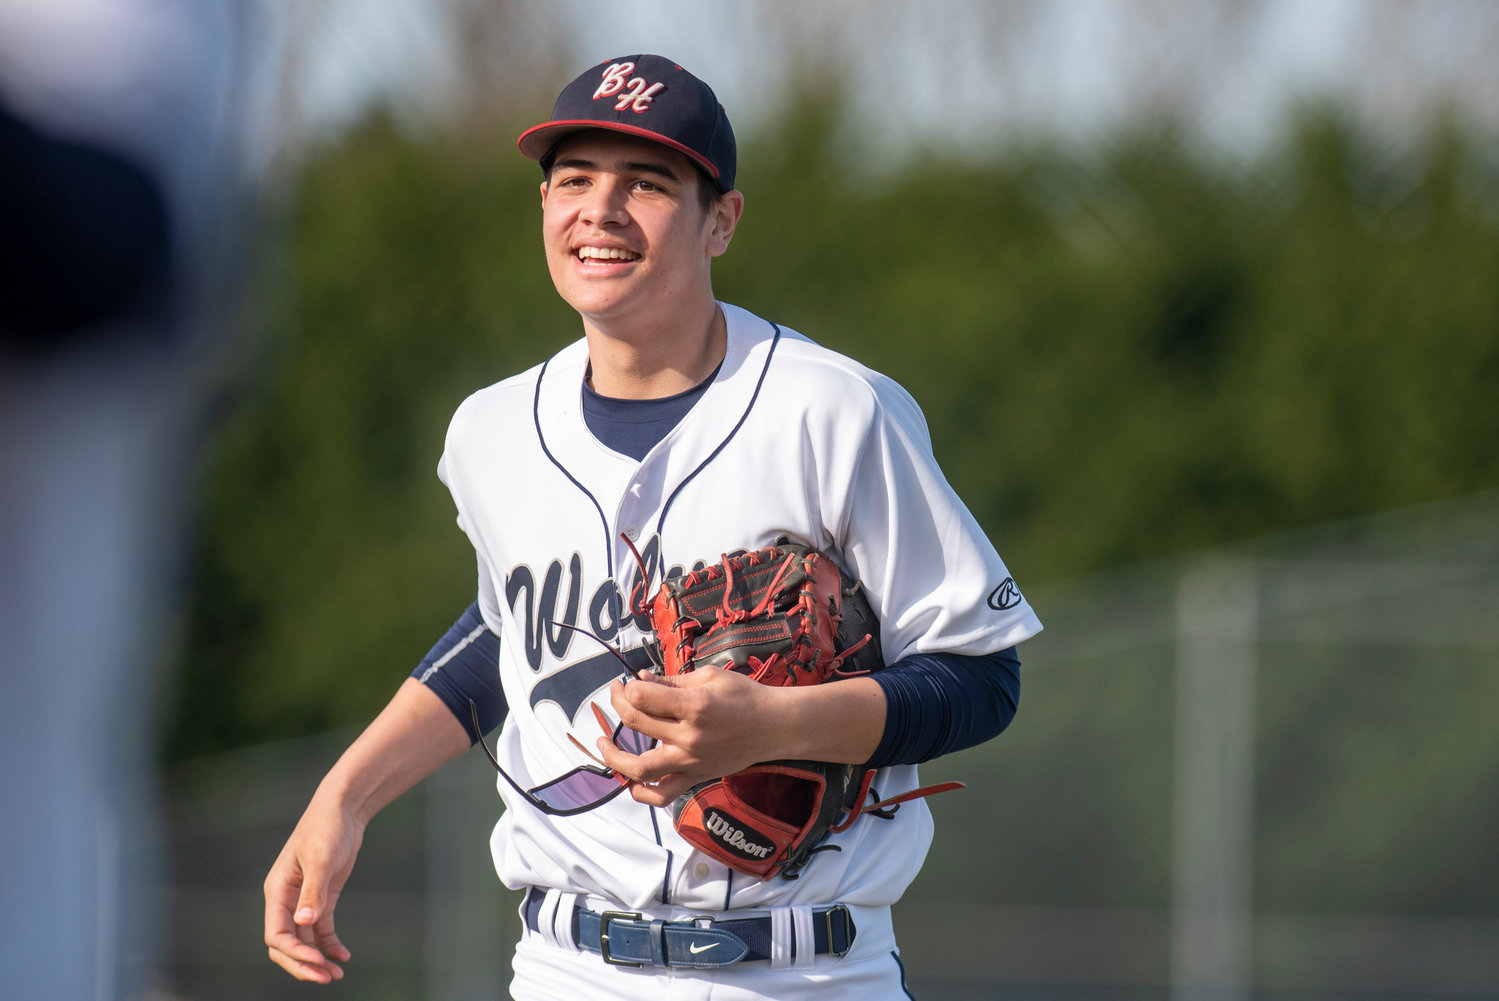 Black Hills' Mark Otto smiles after making the final out of the first inning during a home game against Tumwater on March 24.